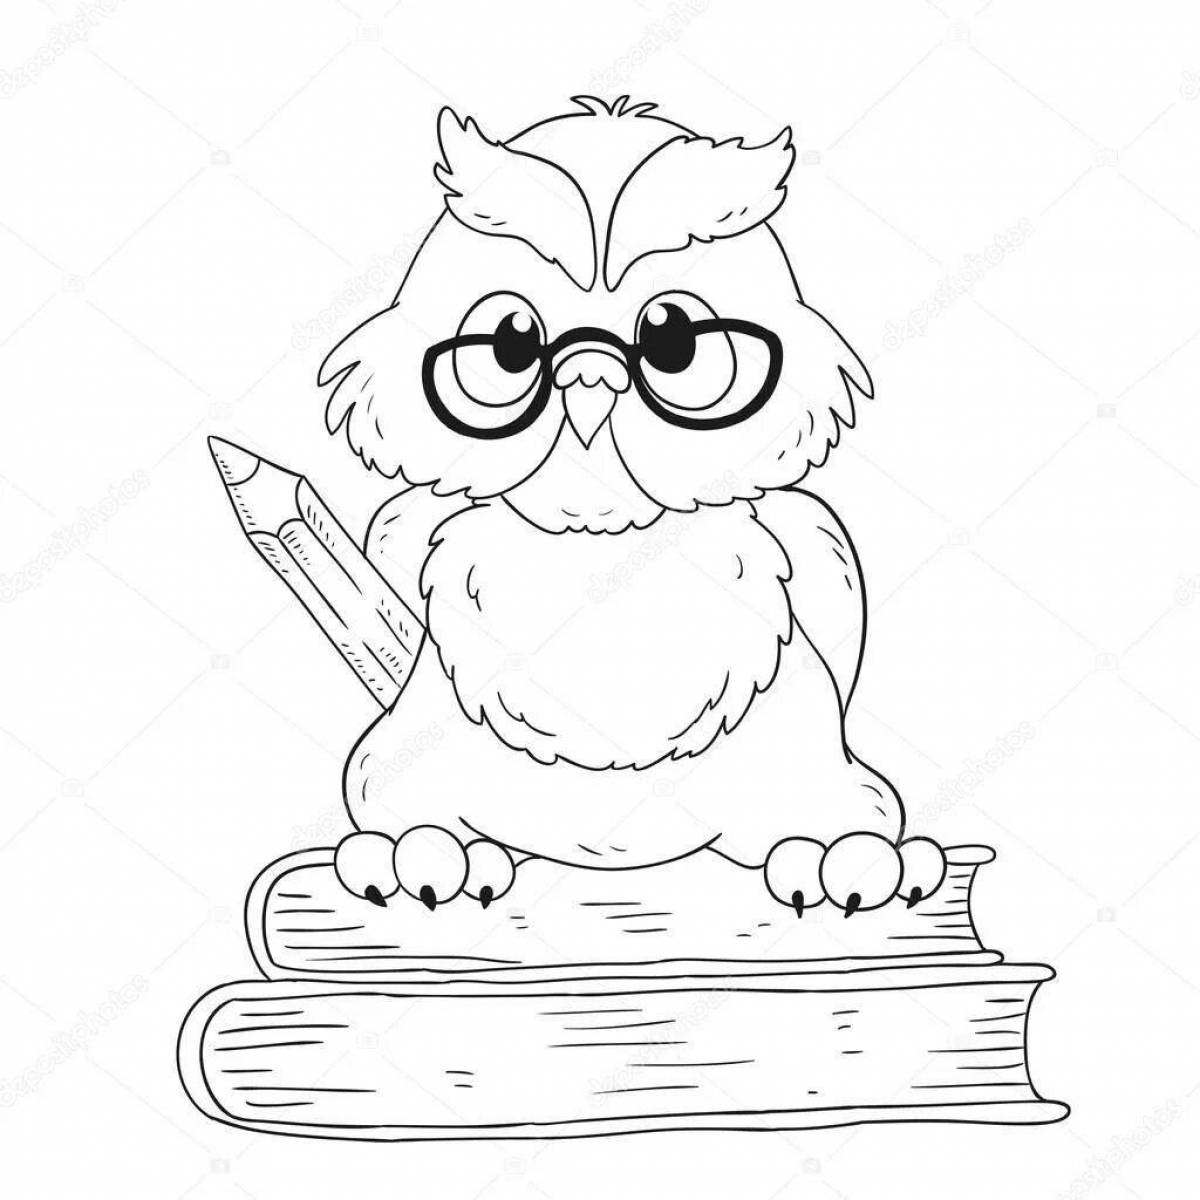 Humorous wise owl coloring book for kids